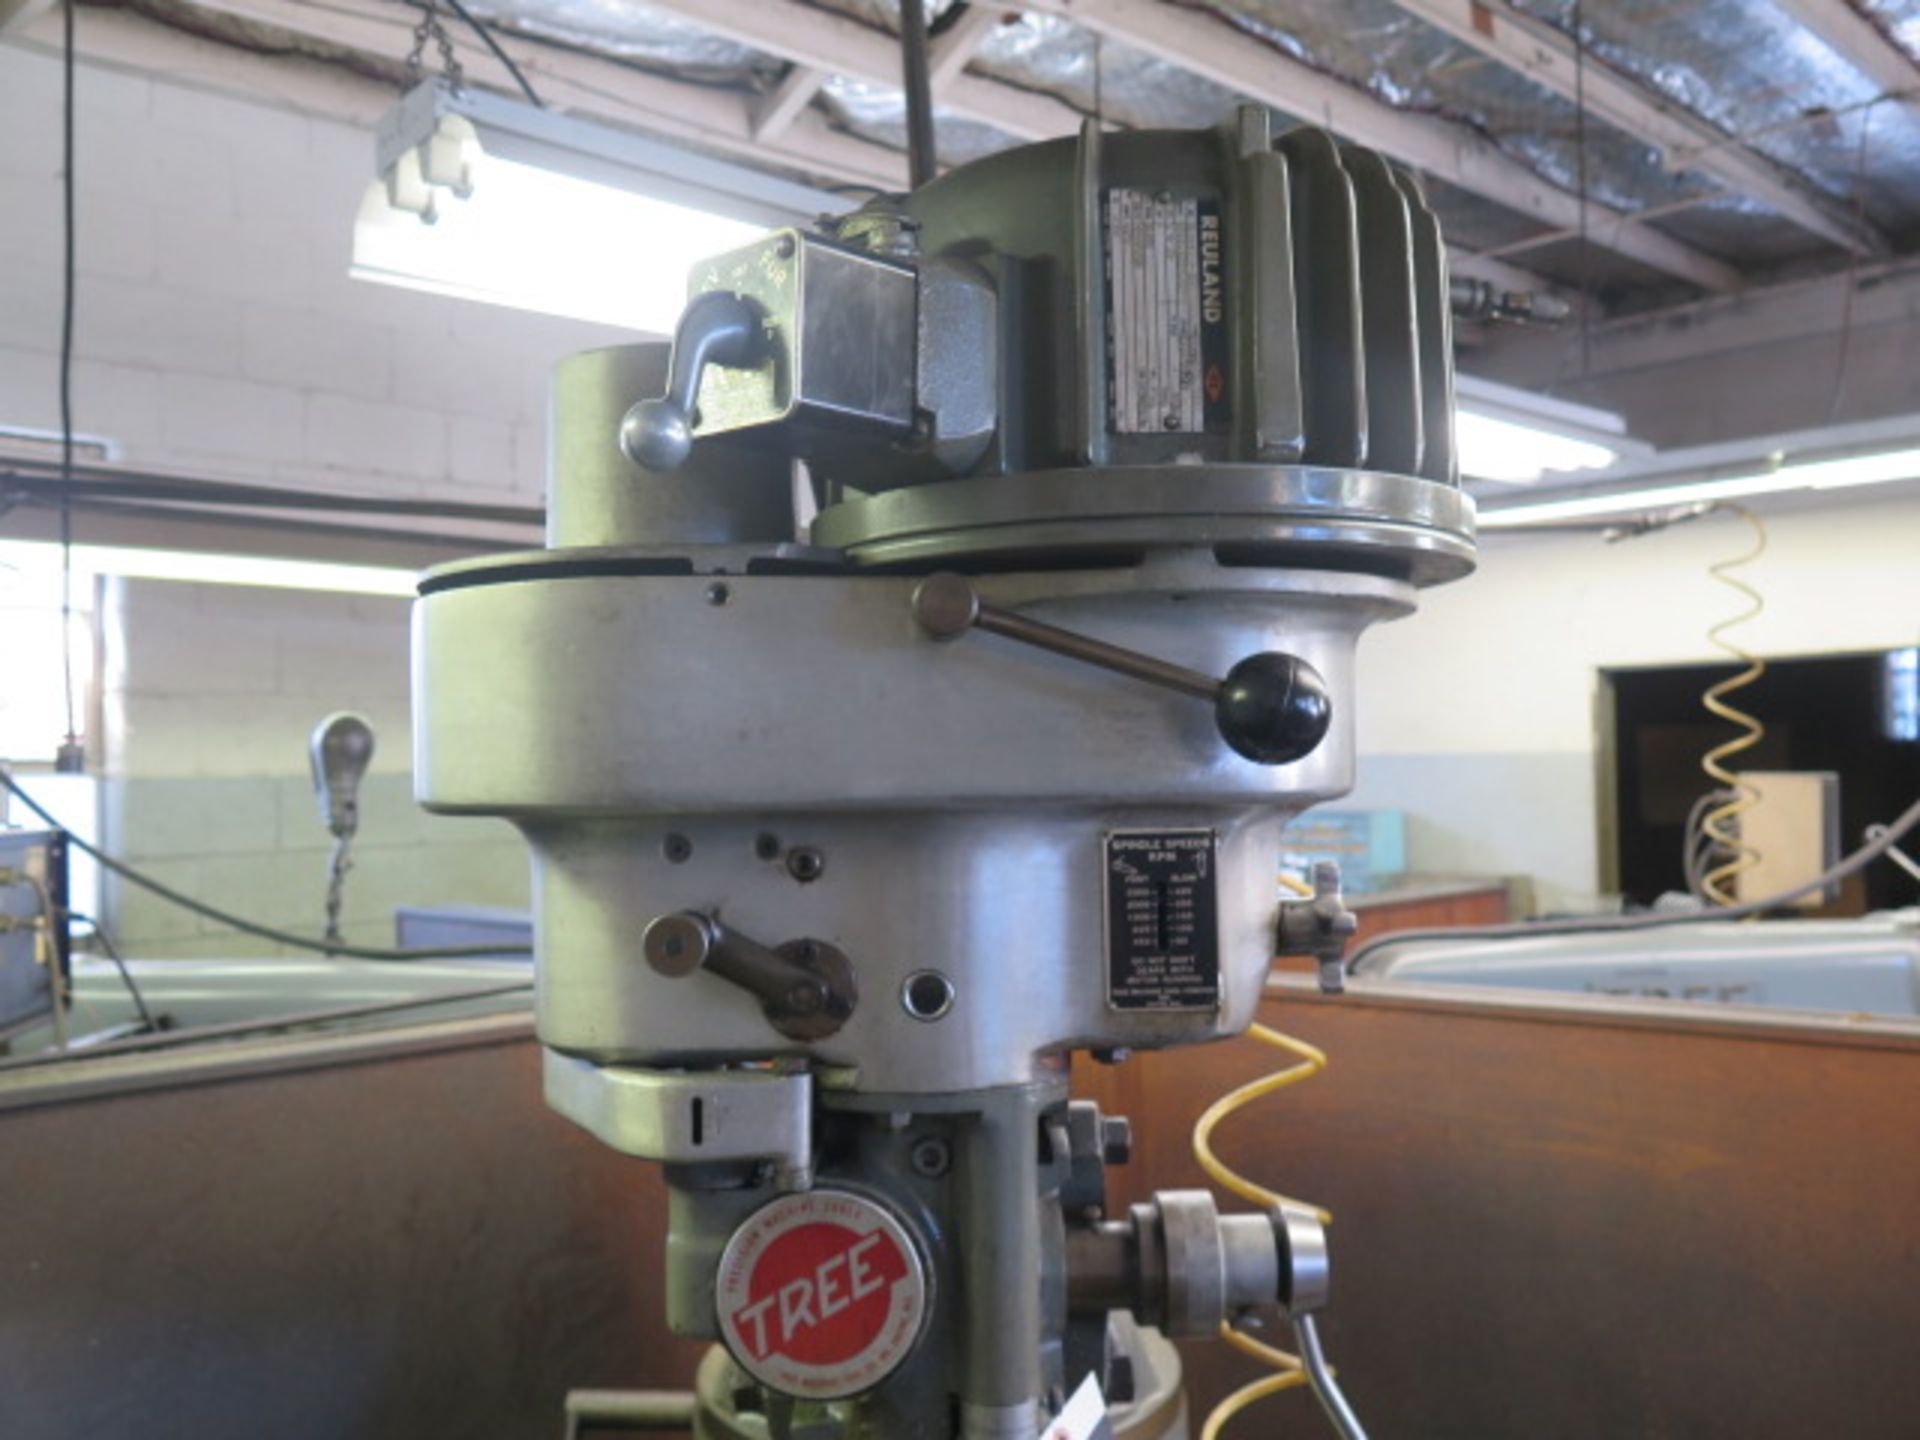 Tree 2UVRC Vertical Mill w/ 2Hp Motor, 60-3300 Dial Change RPM, Colleted Spindle, Power “X” and Knee - Image 3 of 7